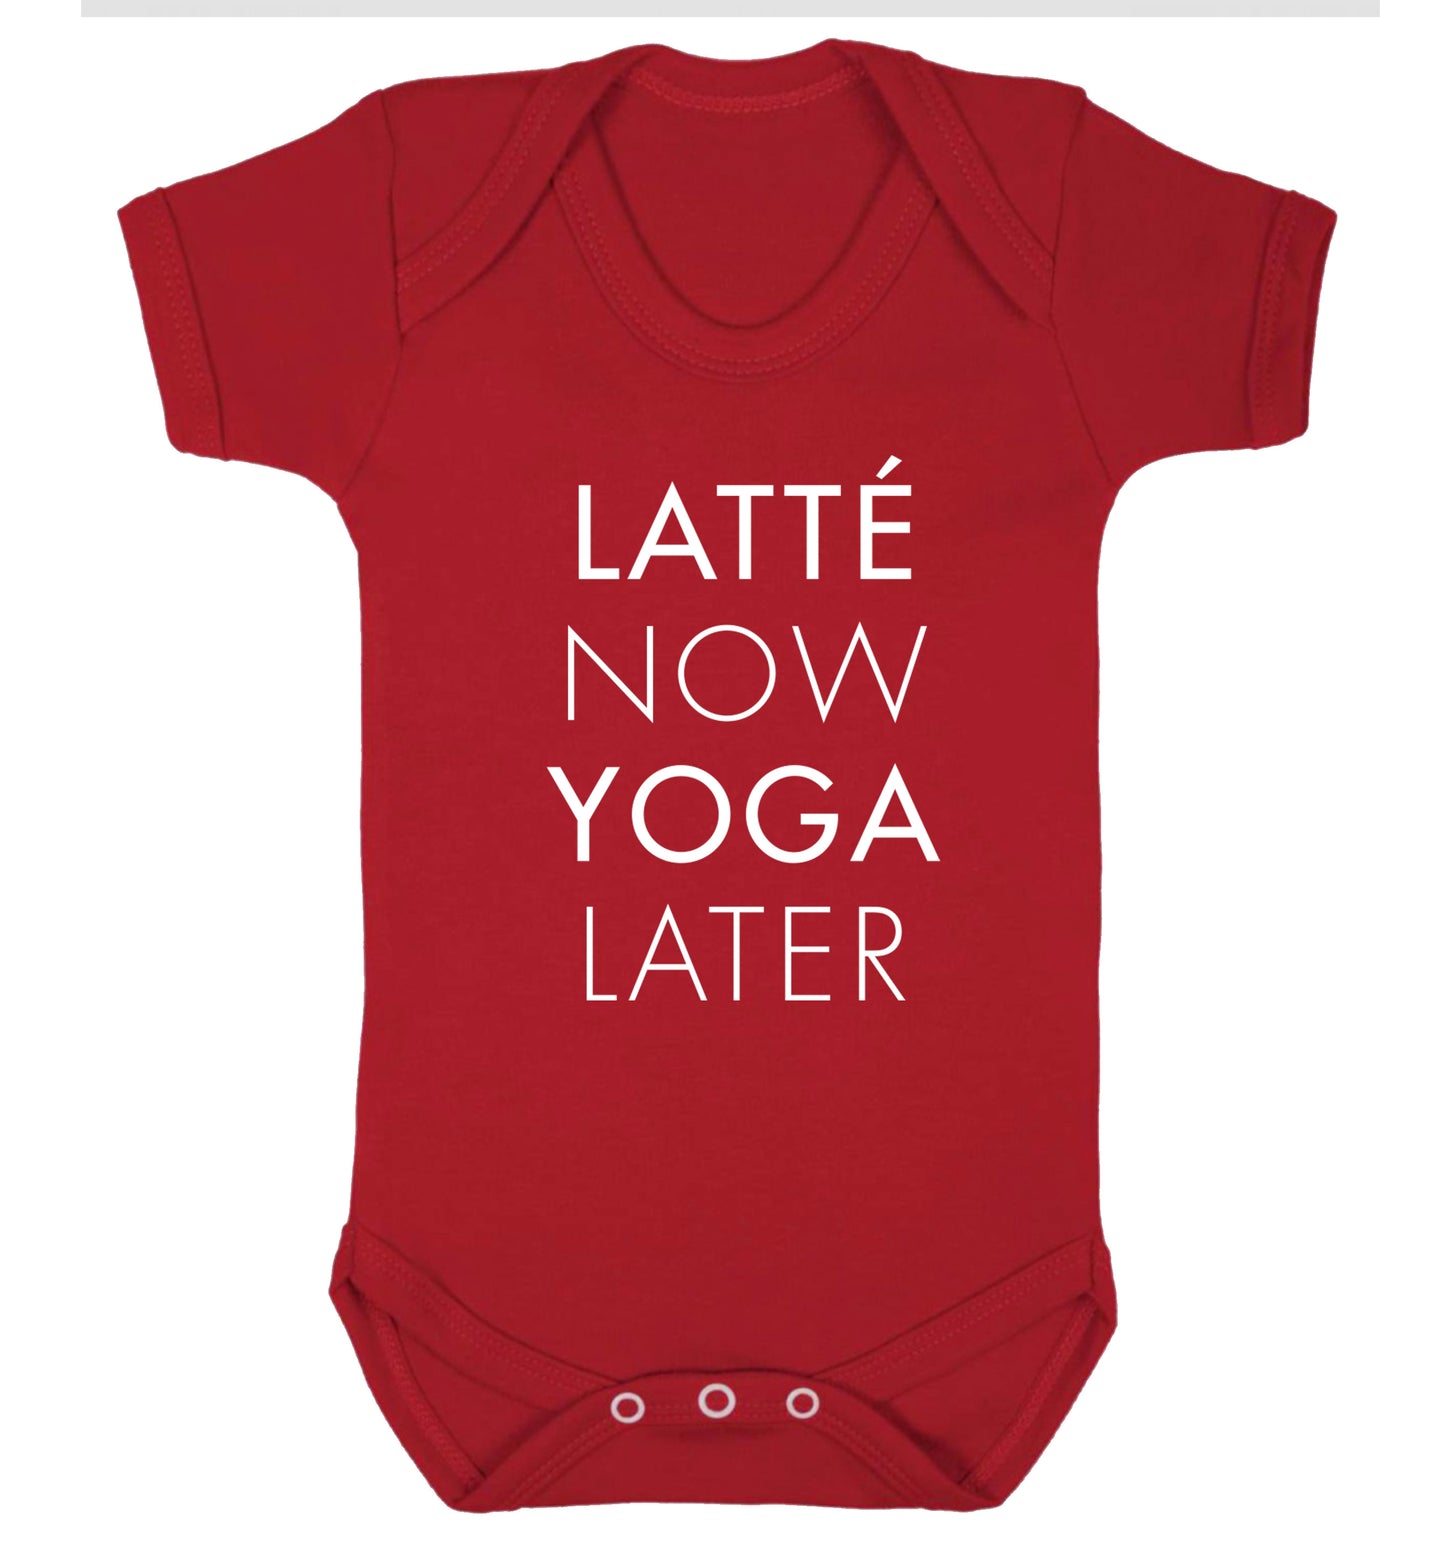 Latte now yoga later Baby Vest red 18-24 months